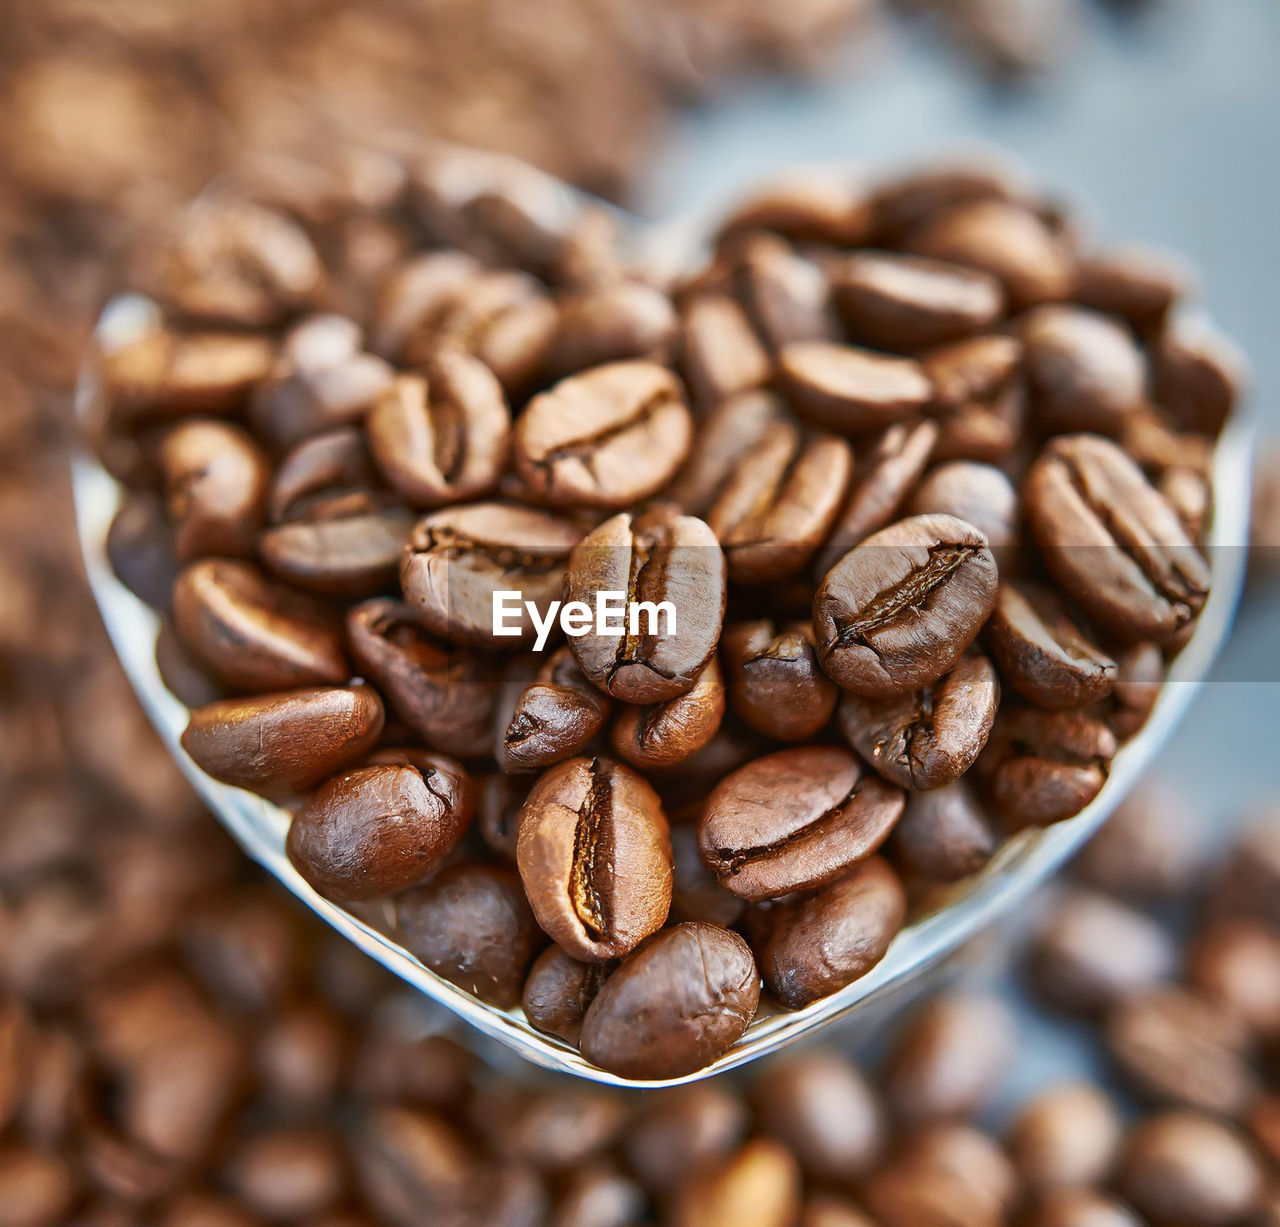 food and drink, food, coffee, roasted coffee bean, drink, brown, freshness, close-up, large group of objects, no people, cup, abundance, still life, indoors, produce, roasted, refreshment, studio shot, healthy eating, scented, selective focus, seed